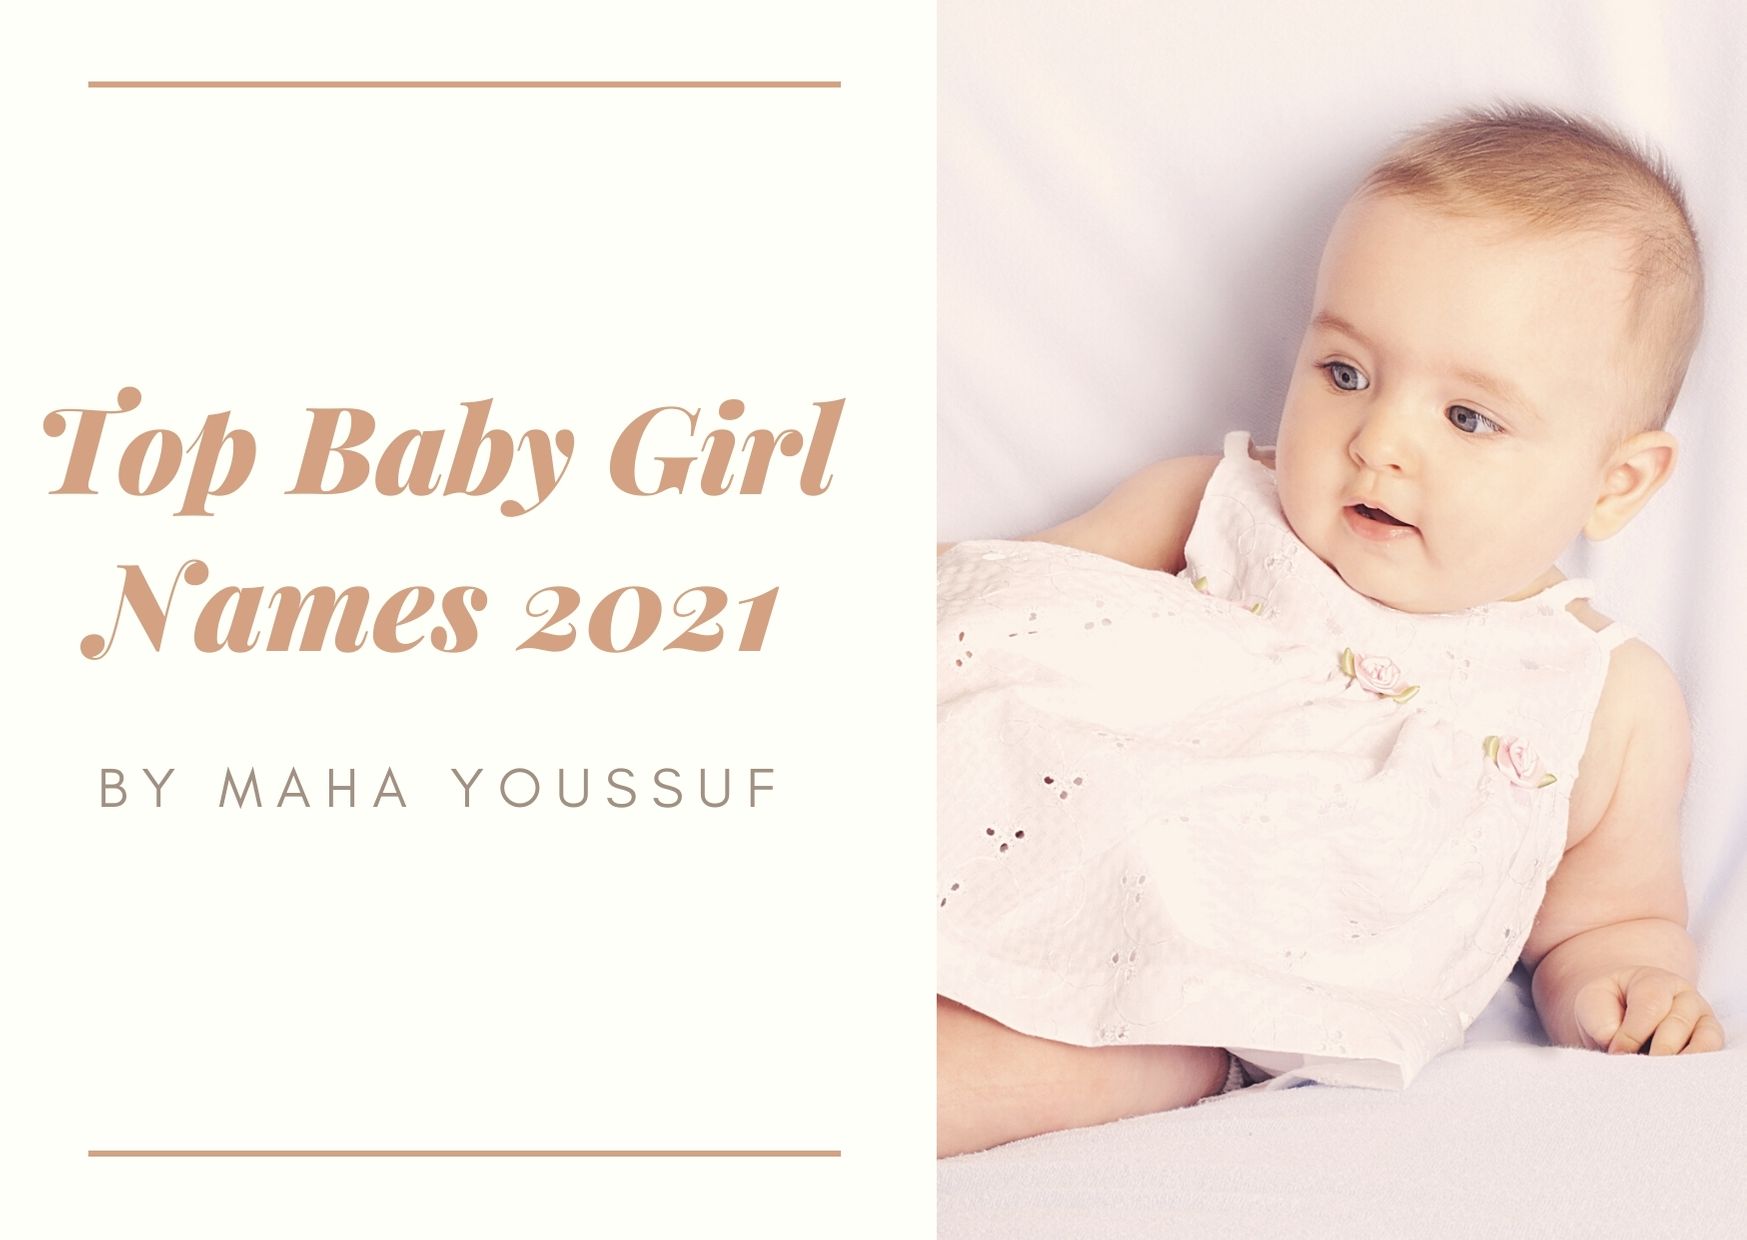 Top Baby Girl Names for 2021